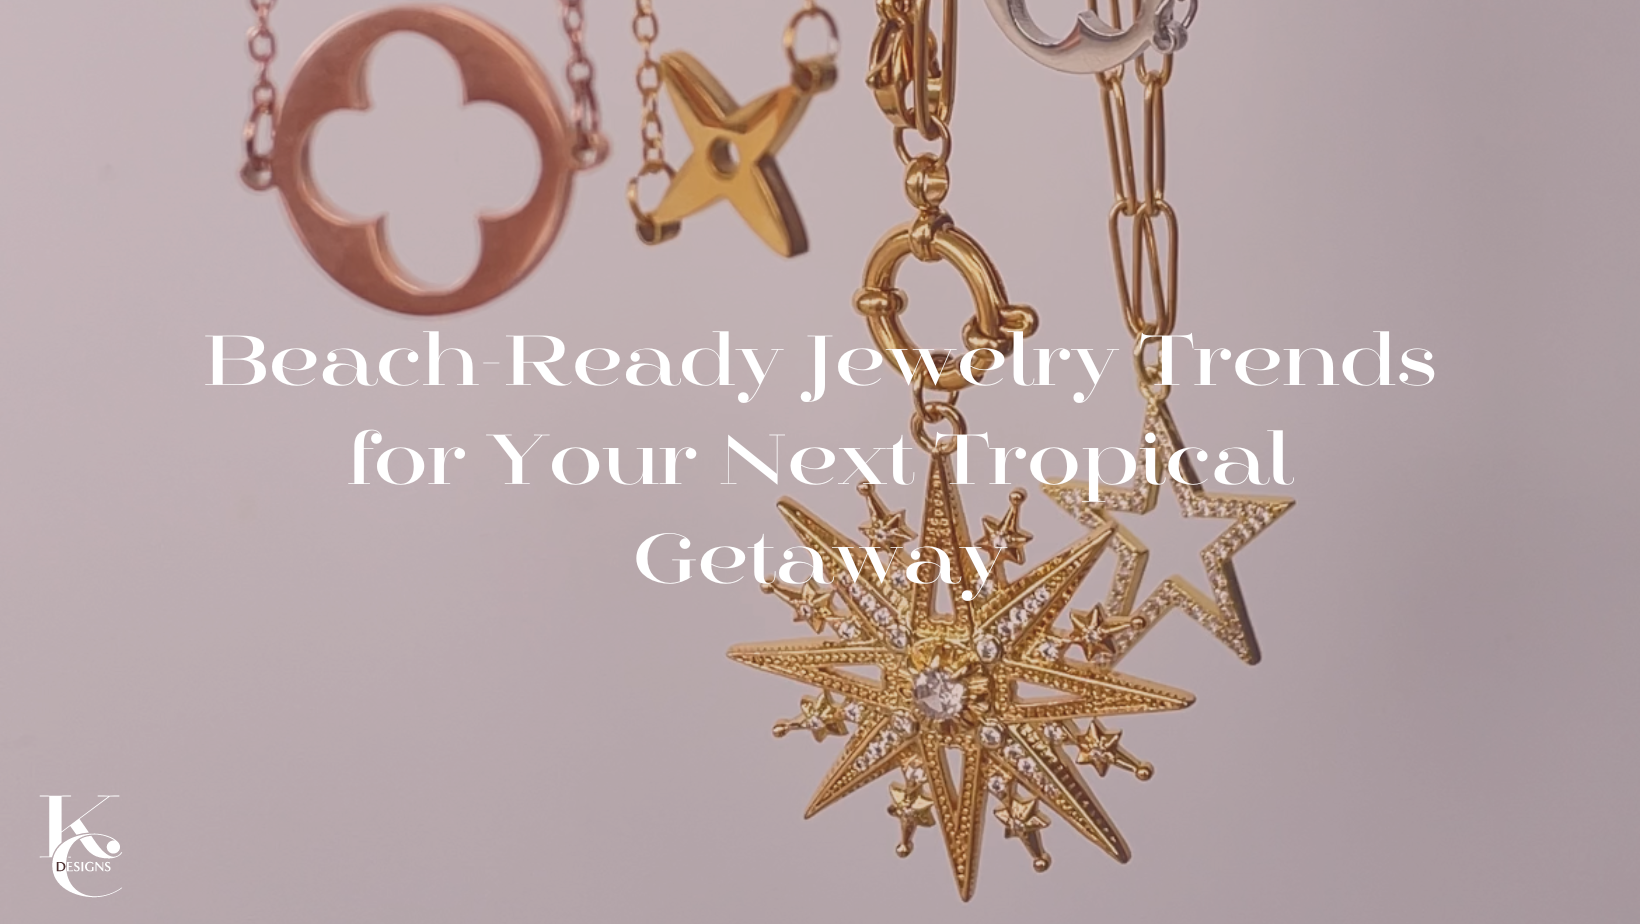 Beach-Ready Jewelry Trends for Your Next Tropical Getaway